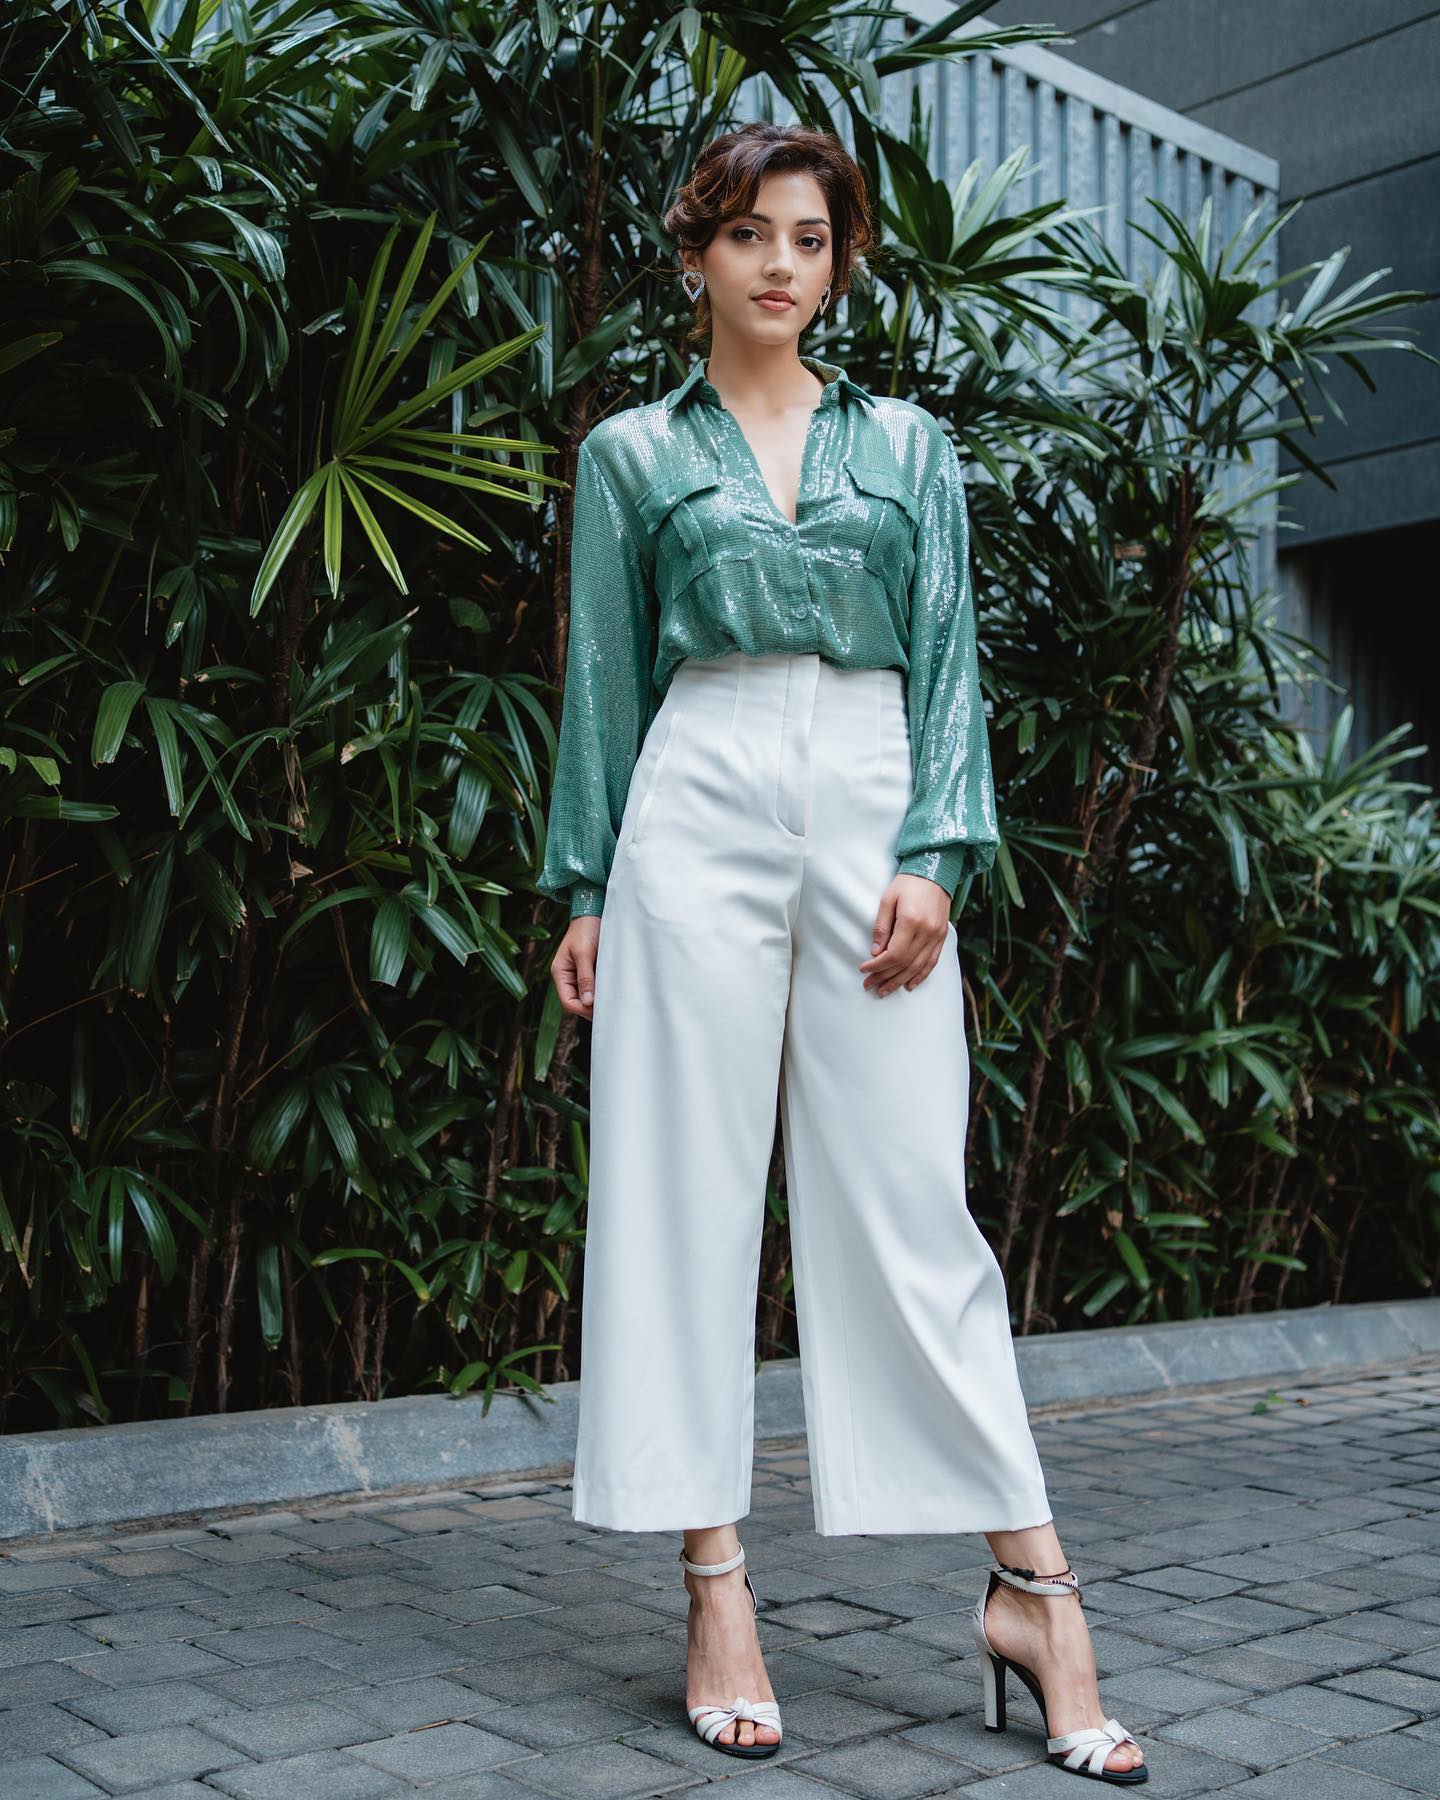 Mehreen Pirzada Vintage Look In Green Shimmery Shirt With White Pants